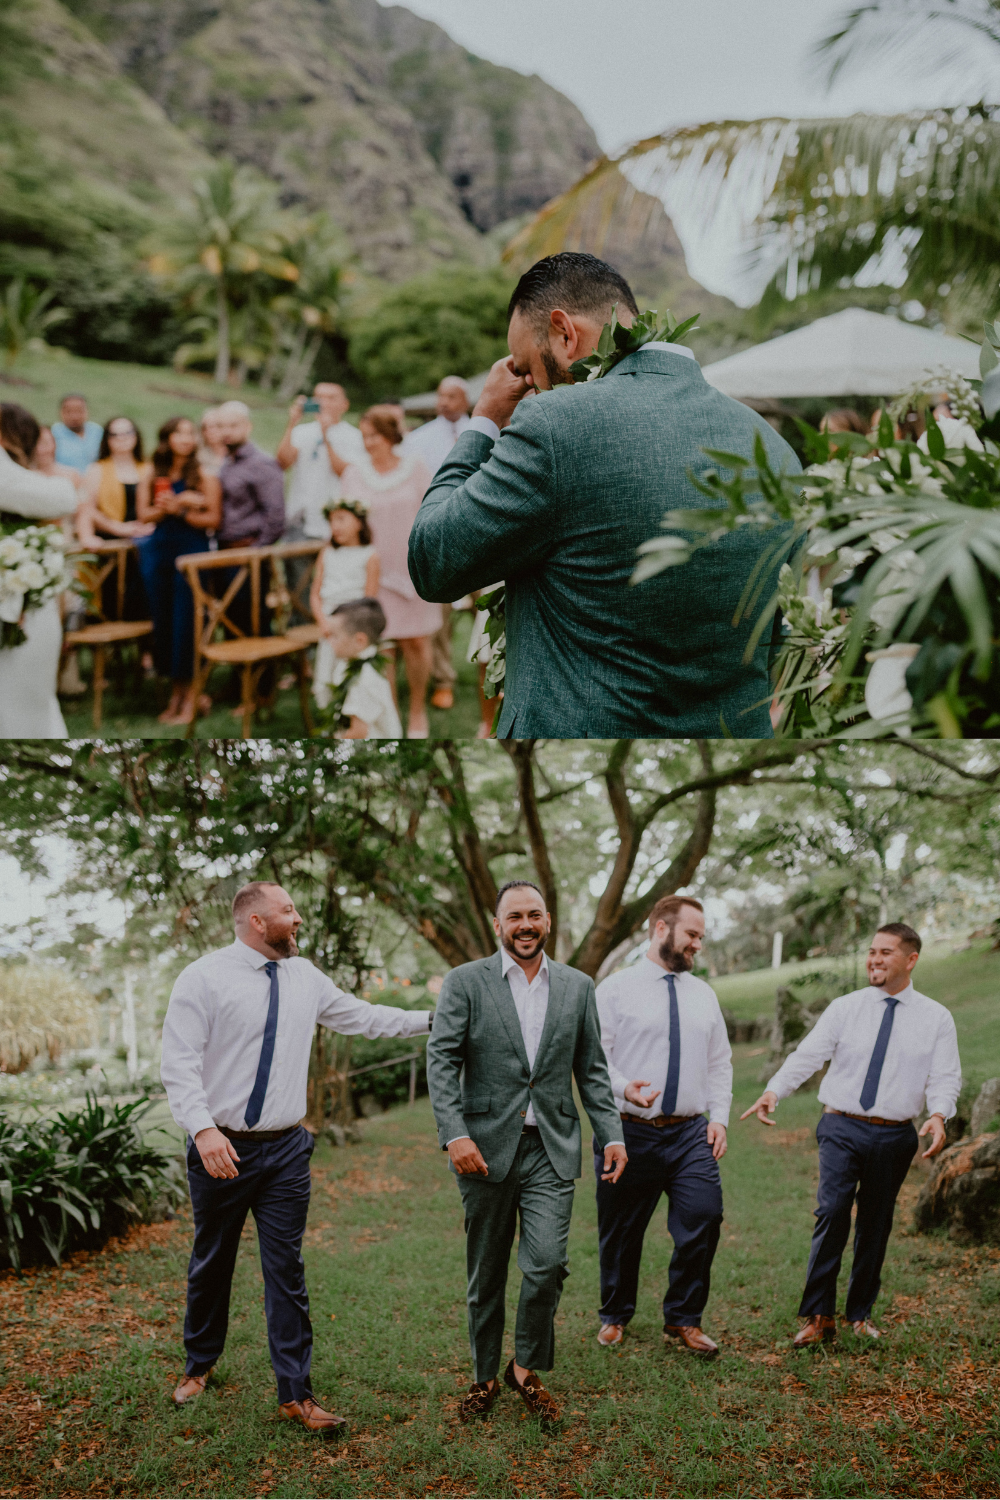 Groom and groomsmen walk down the aisle before the ceremony and groom gets emotional while watching the bride walk down the aisle | Oahu Wedding Photographer, Oahu Elopement Photographer, Destination Wedding Photographer, Destination Elopement Photographer, Newlywed moments ideas, Newlywed Photography inspiration, Hawaii Elopement ideas | chelseaabril.com